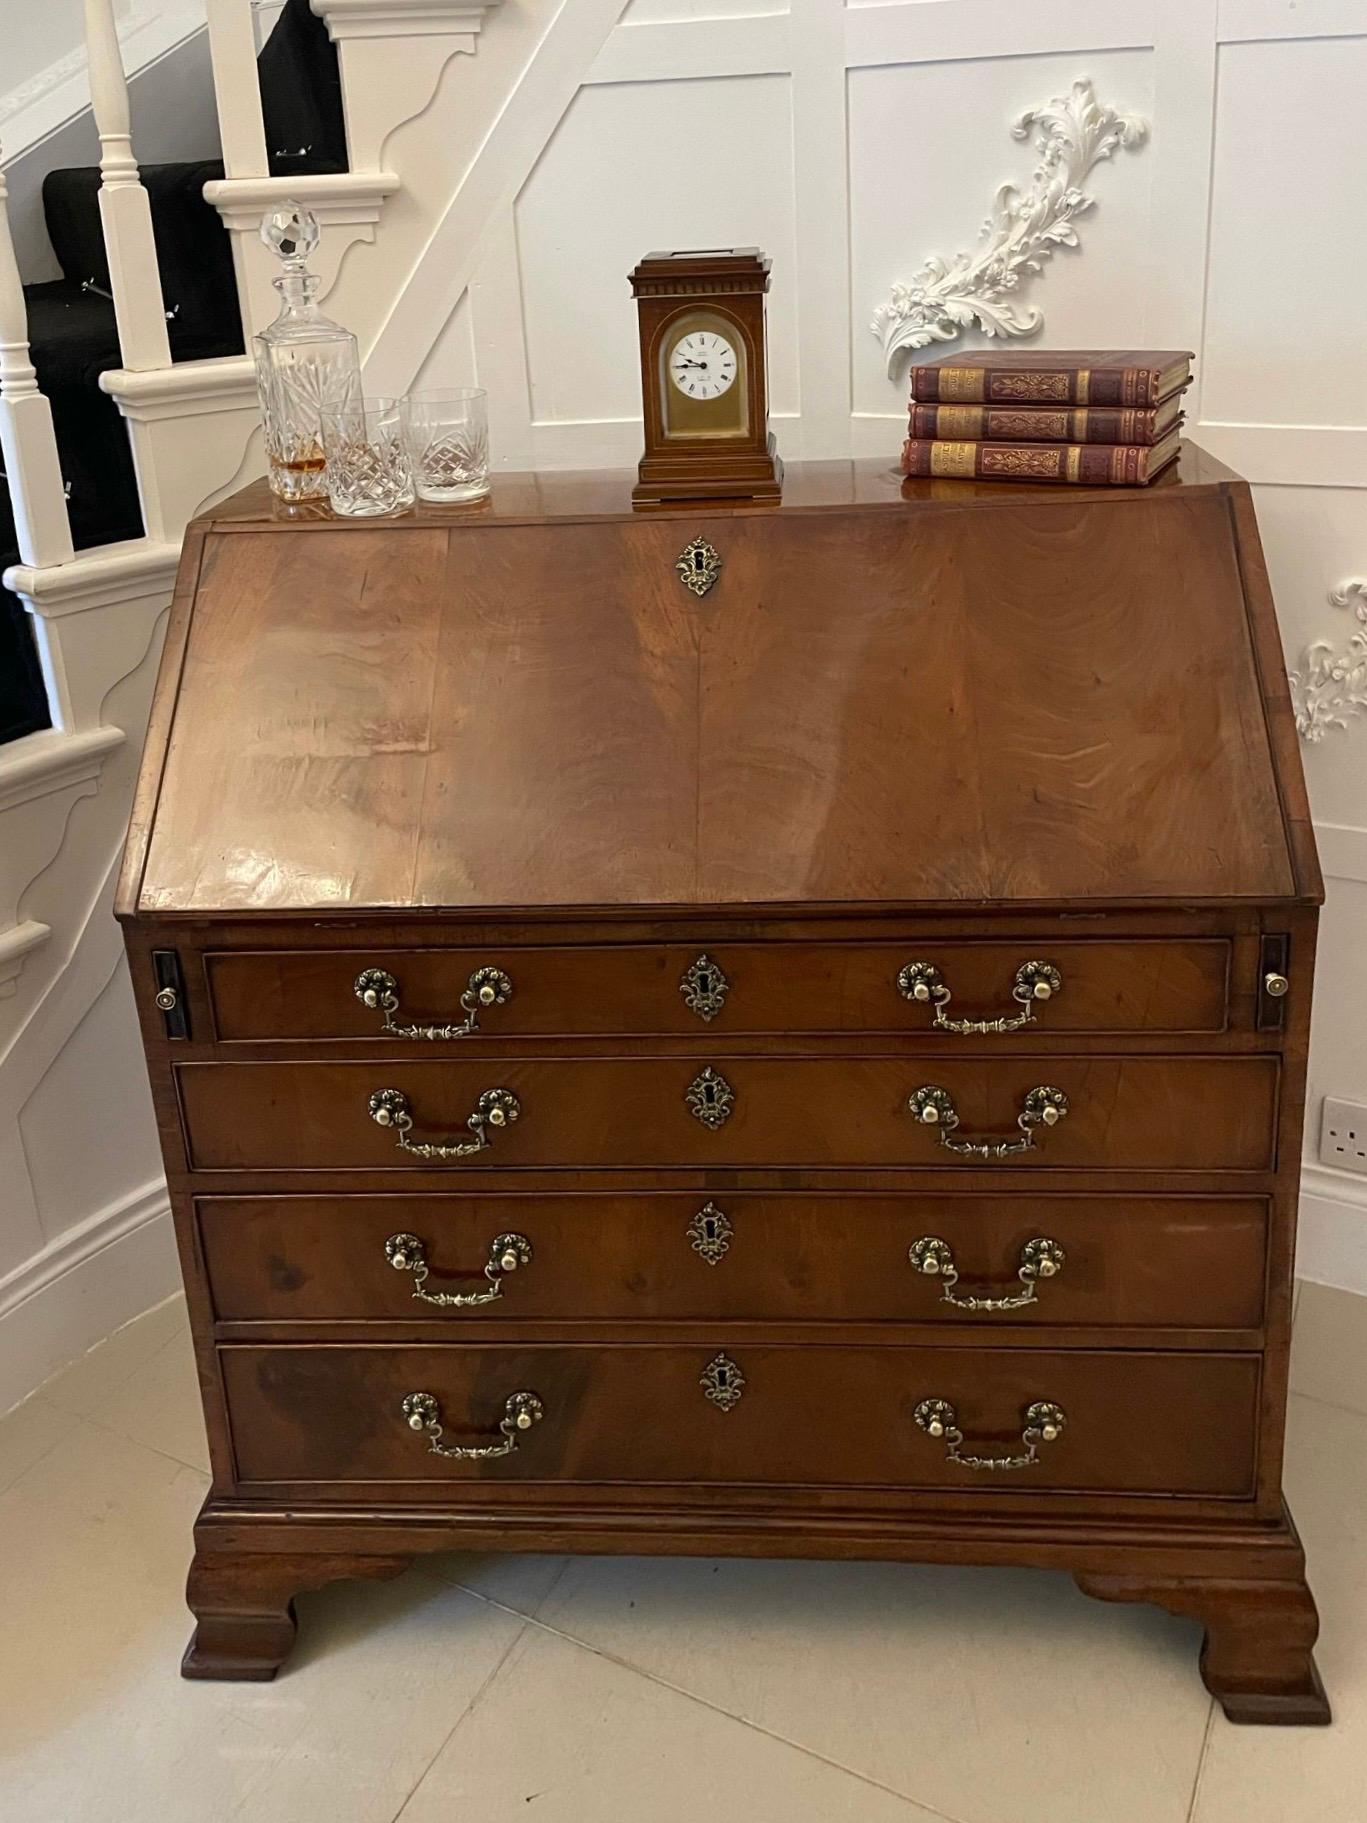 Outstanding quality antique George III mahogany bureau having a figured mahogany fall with a moulded edge opening to reveal a fitted interior consisting of drawers and pigeon holes above four long drawers with oak lining, cockbeeded edges and